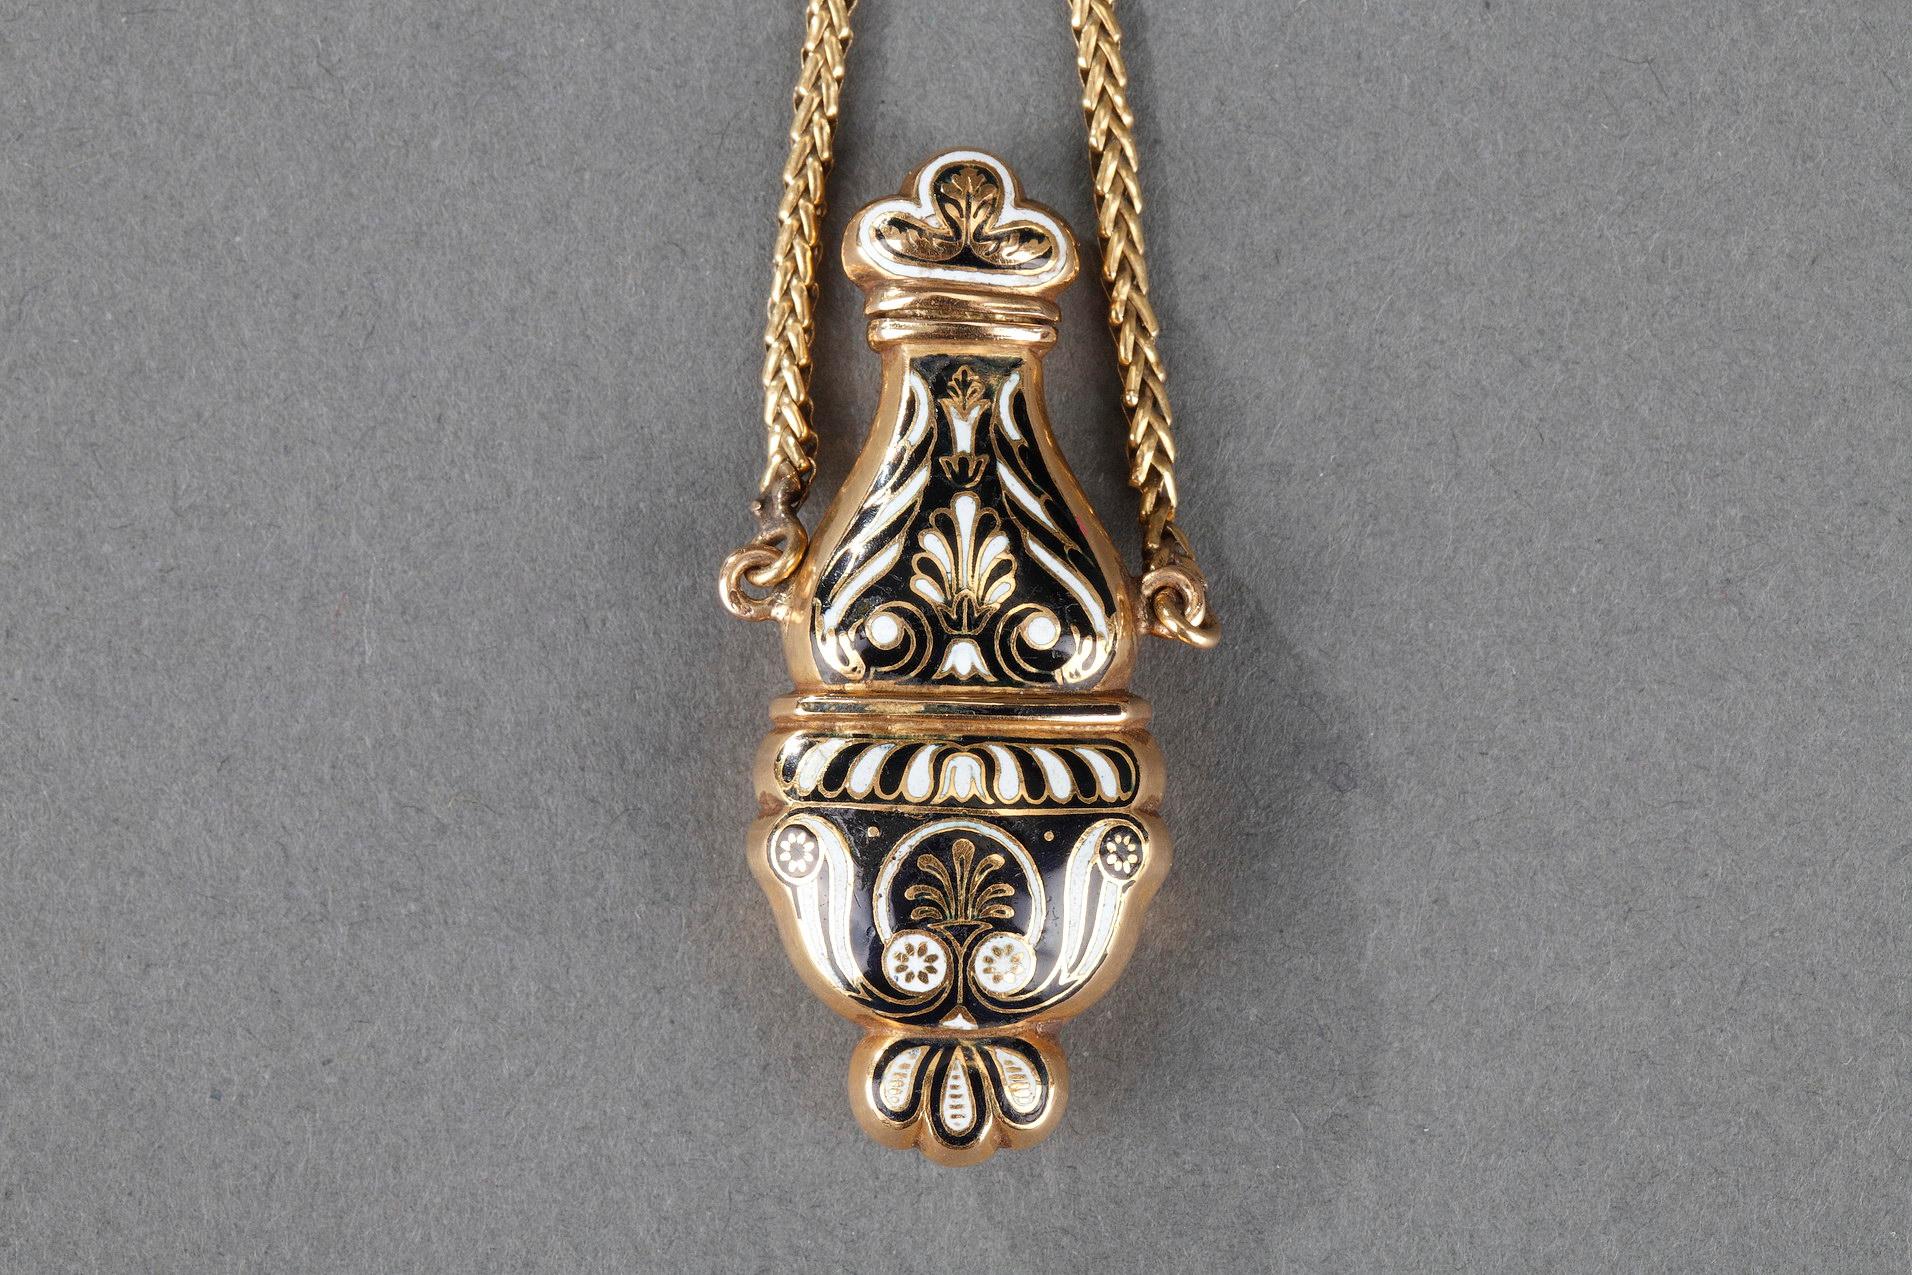 Small perfum bottle in gold and enamel. The flask is decorated with palmettes and foliage motifs in white and black enamel on black enamel background. Two gold chains permitted the suspension of this bottle. The hinged cap opens on a small gold